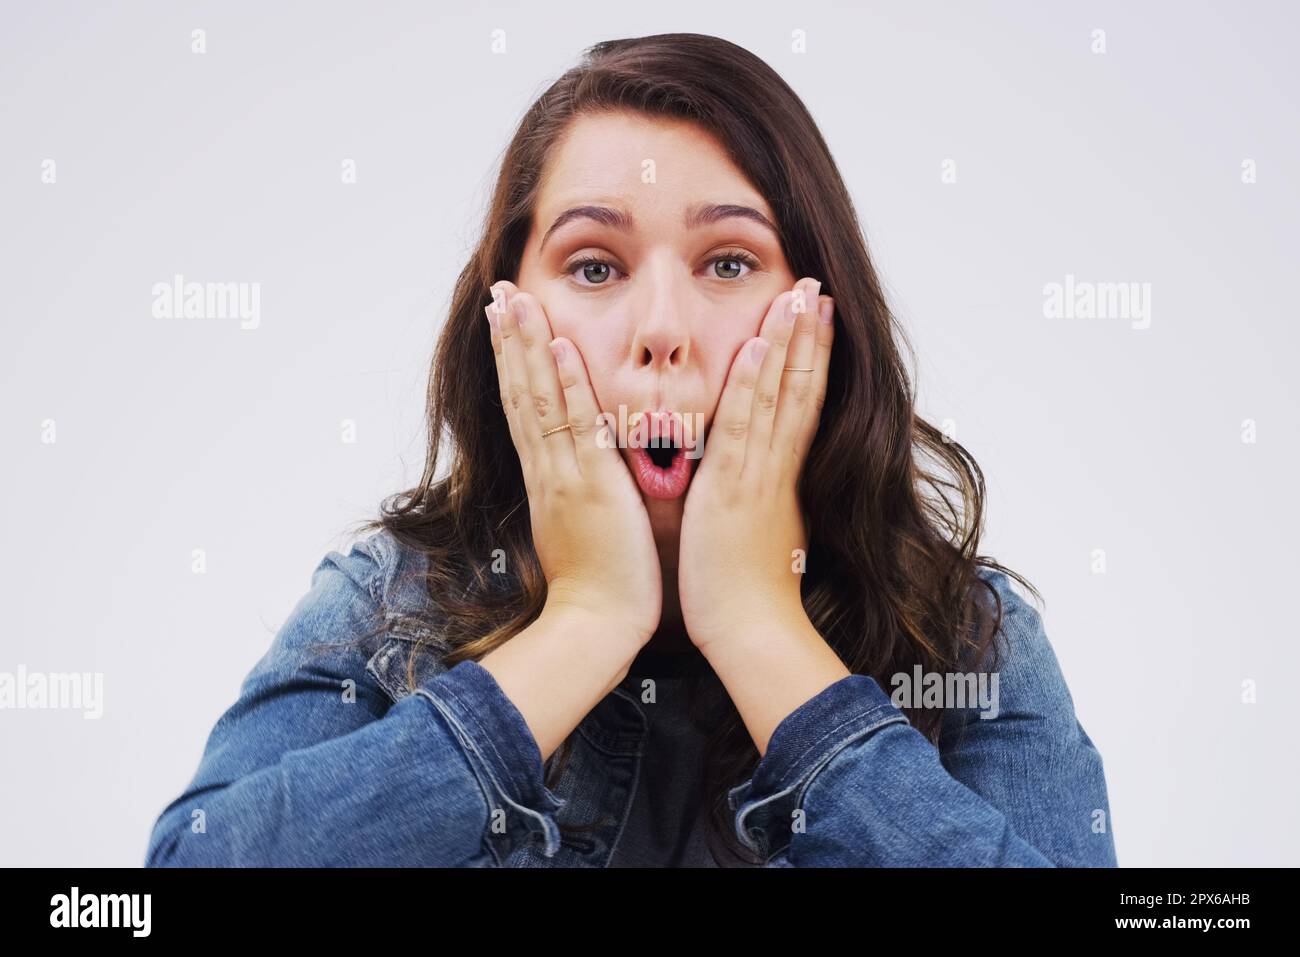 Im absolutely dumbstruck. Studio shot of a young woman making a funny face against a gray background Stock Photo